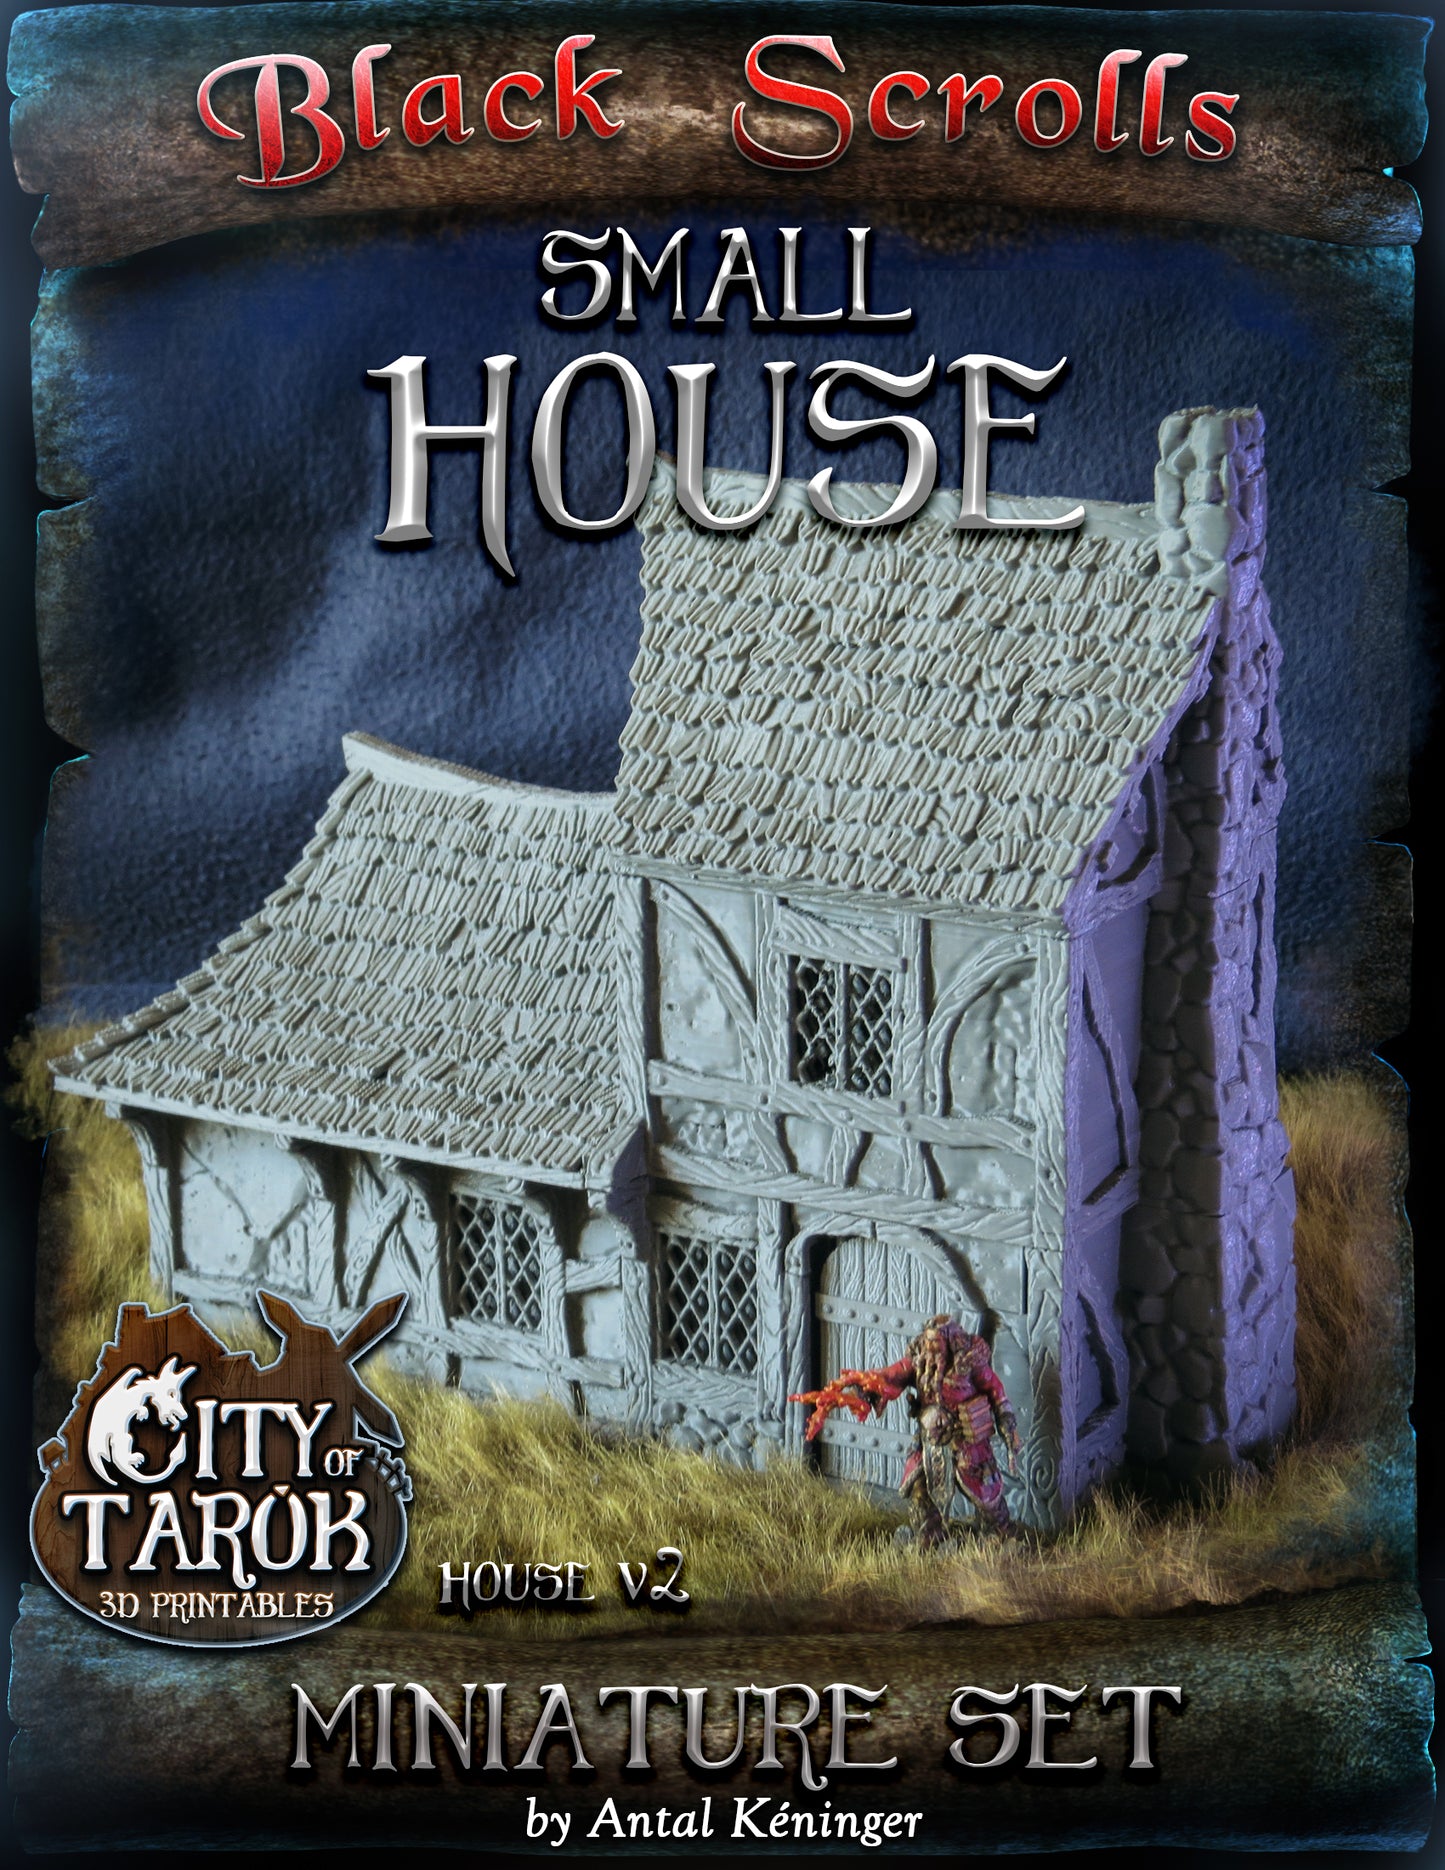 Small house City of Tarok for RPGs, board games, painters and collectors